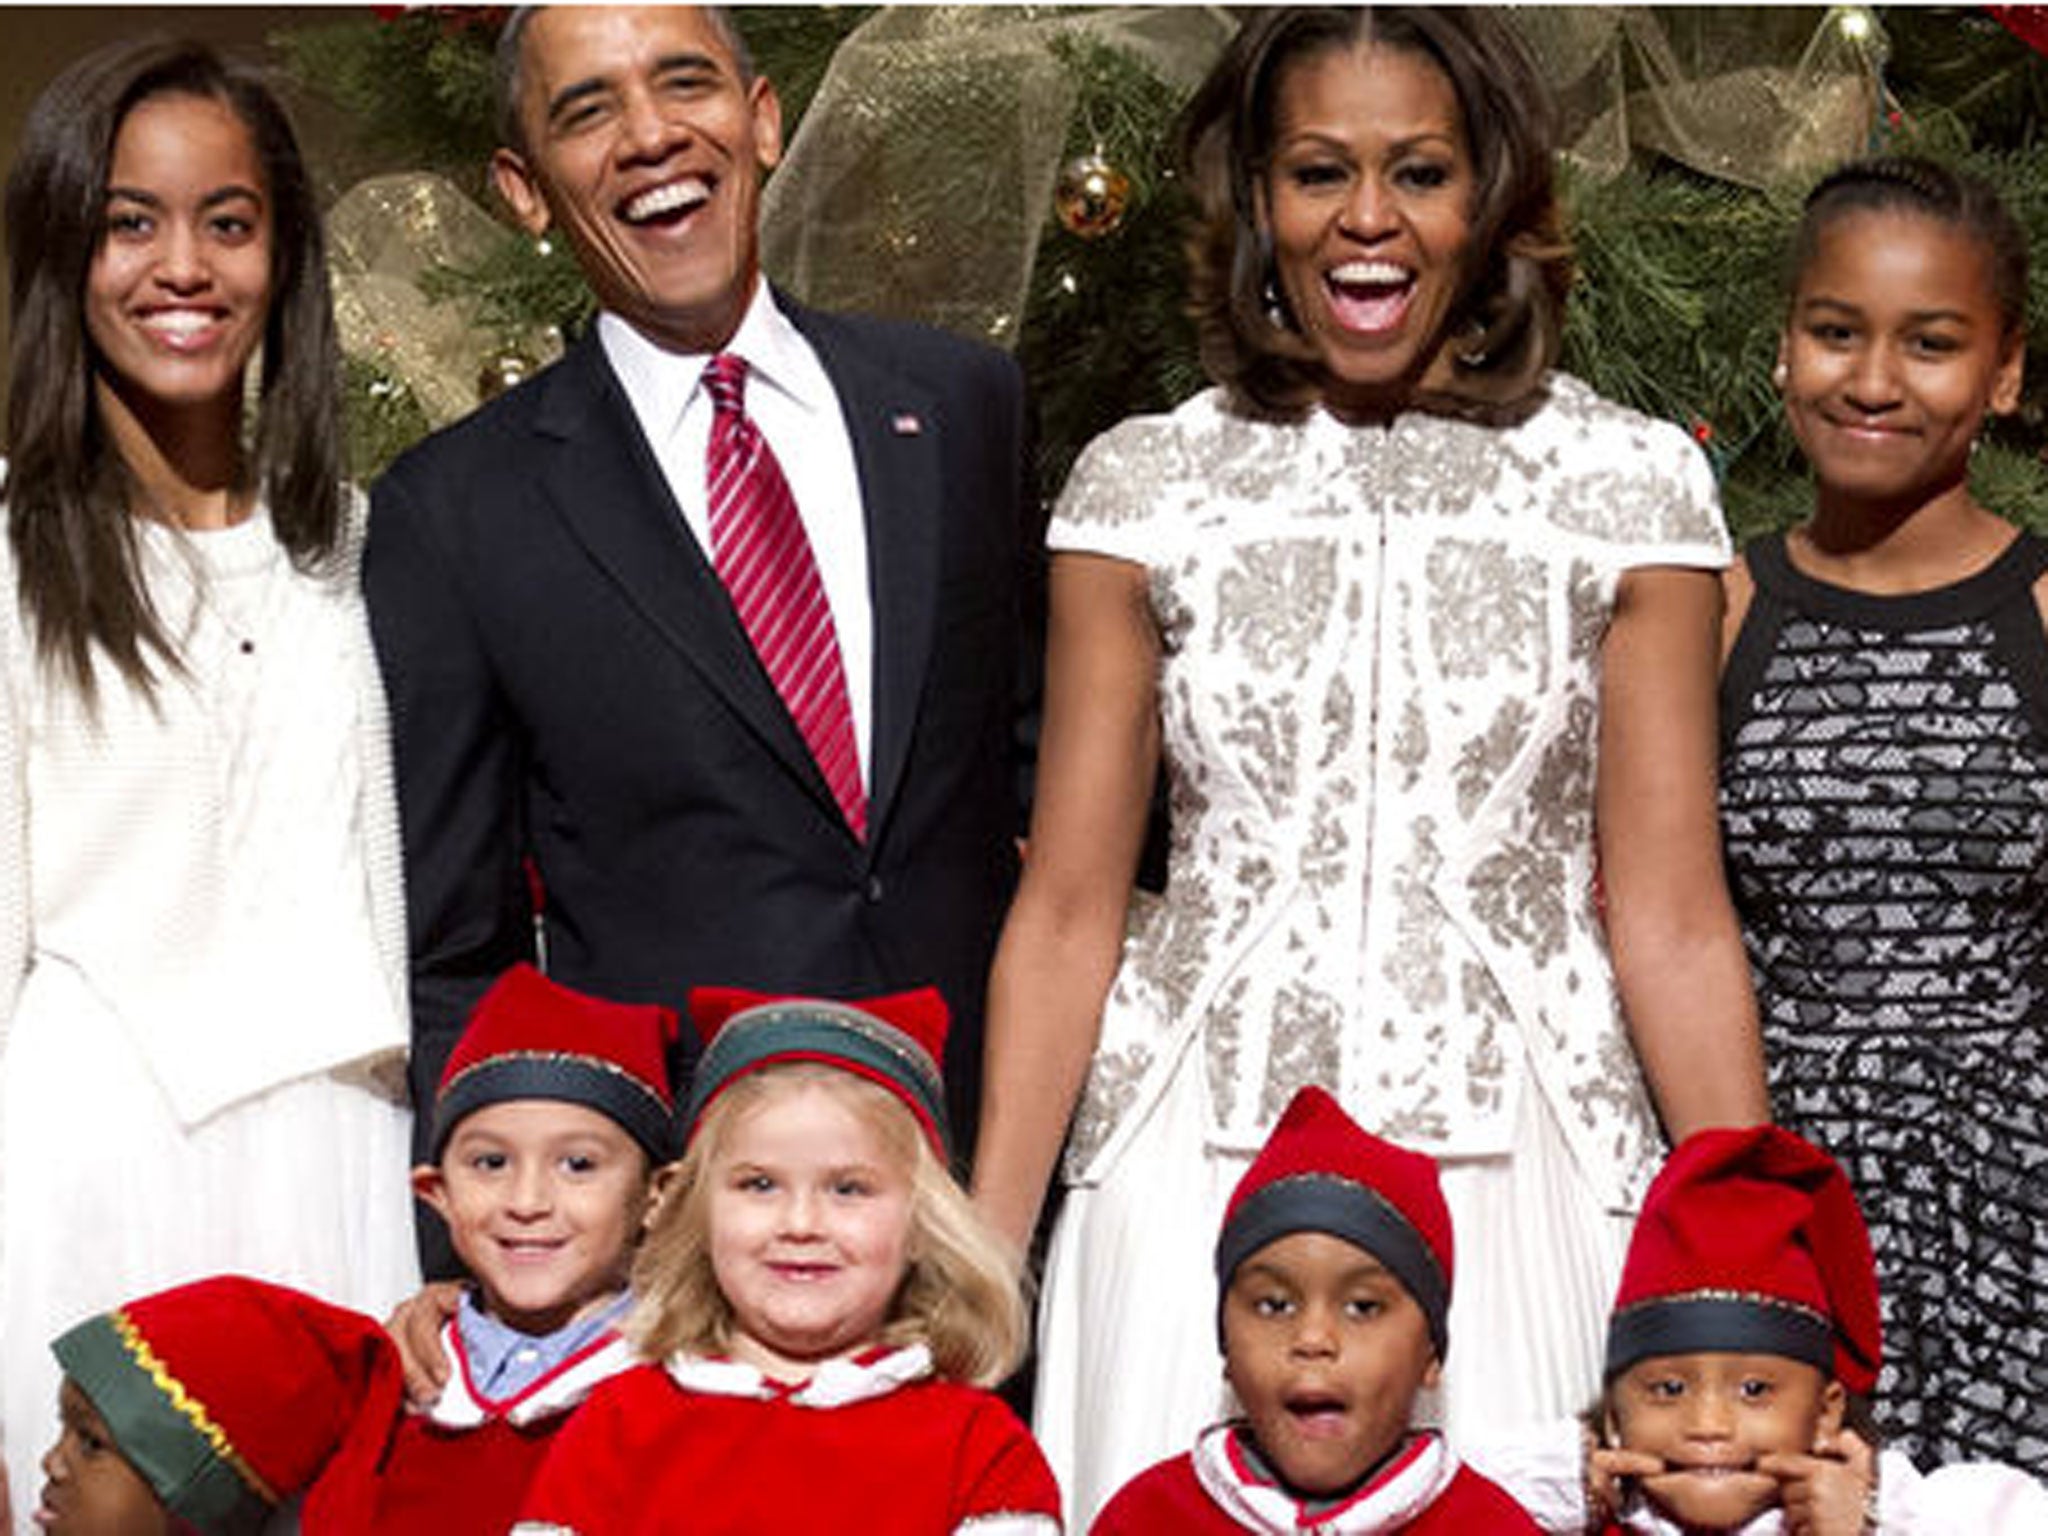 One of the five elves managed to upstage the US president during a Christmas photocall